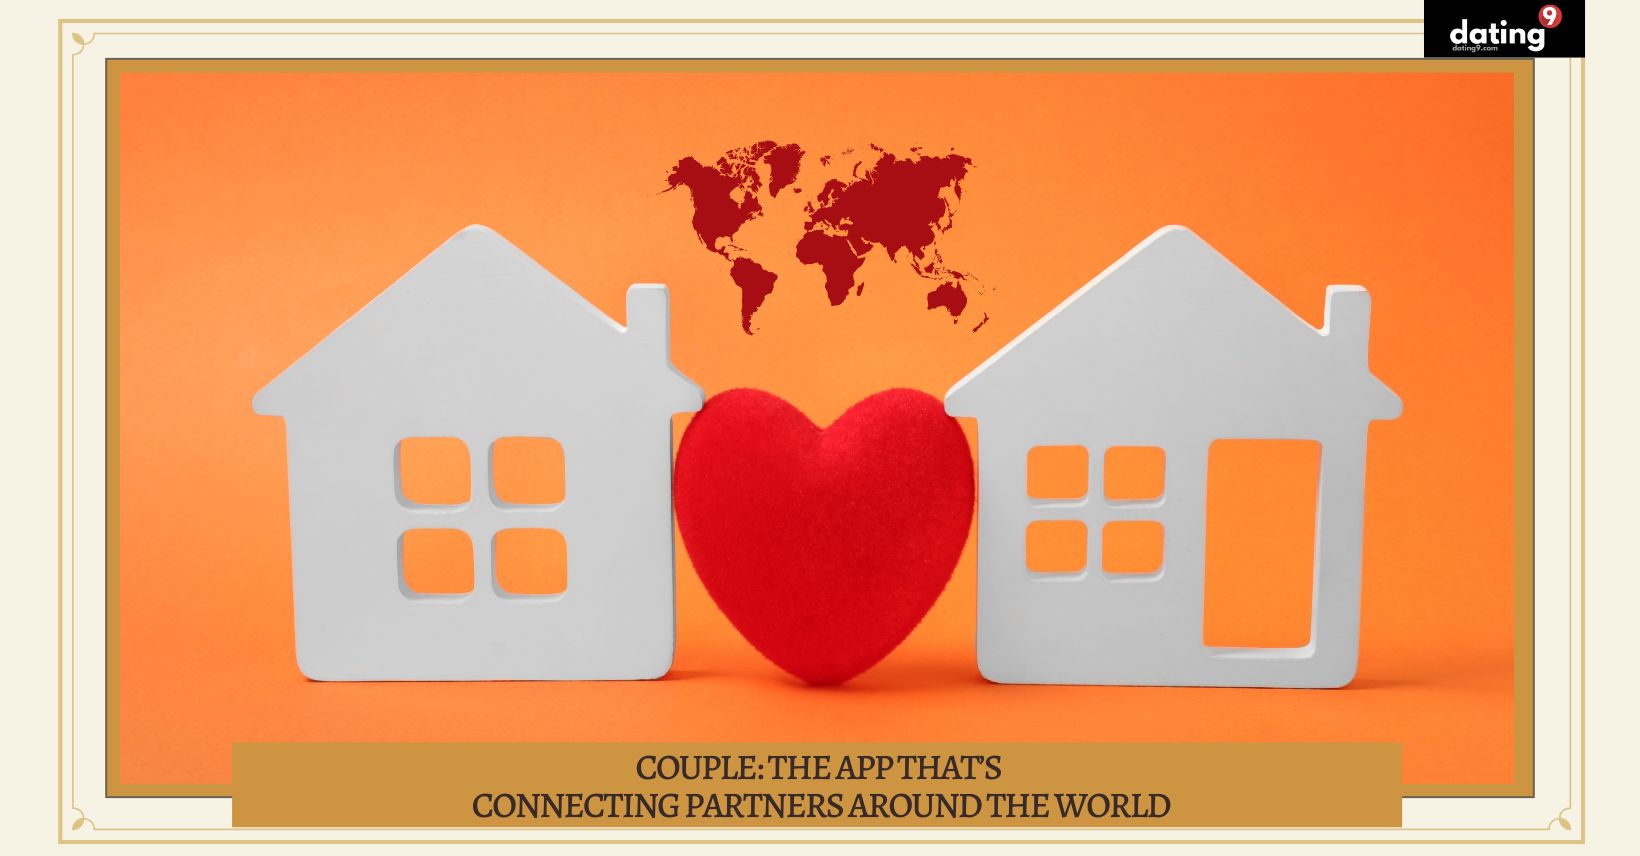 Couple: The App That's Connecting Partners Around the World